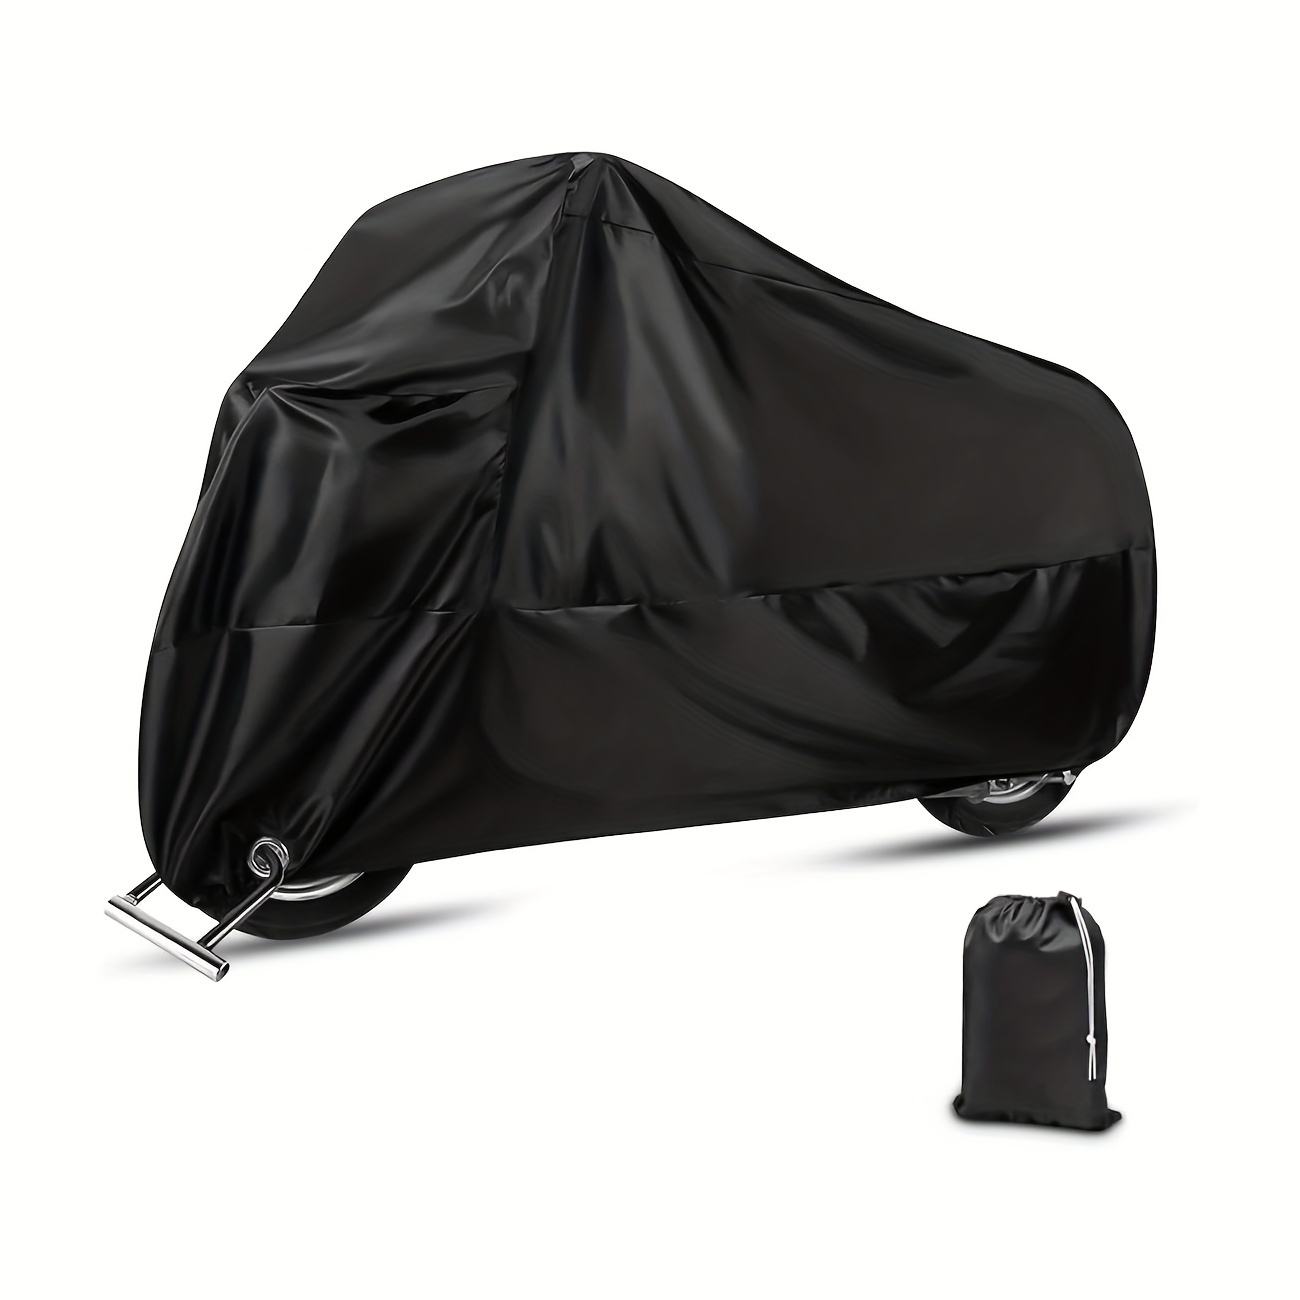 

Waterproof Motorcycle Cover With Lock Hole & Storage Bag - Dustproof Outdoor Protection, All-black, Multiple Sizes Available Motorcycle Covers Waterproof Heavy Duty Motorcycle Cover Waterproof Outdoor